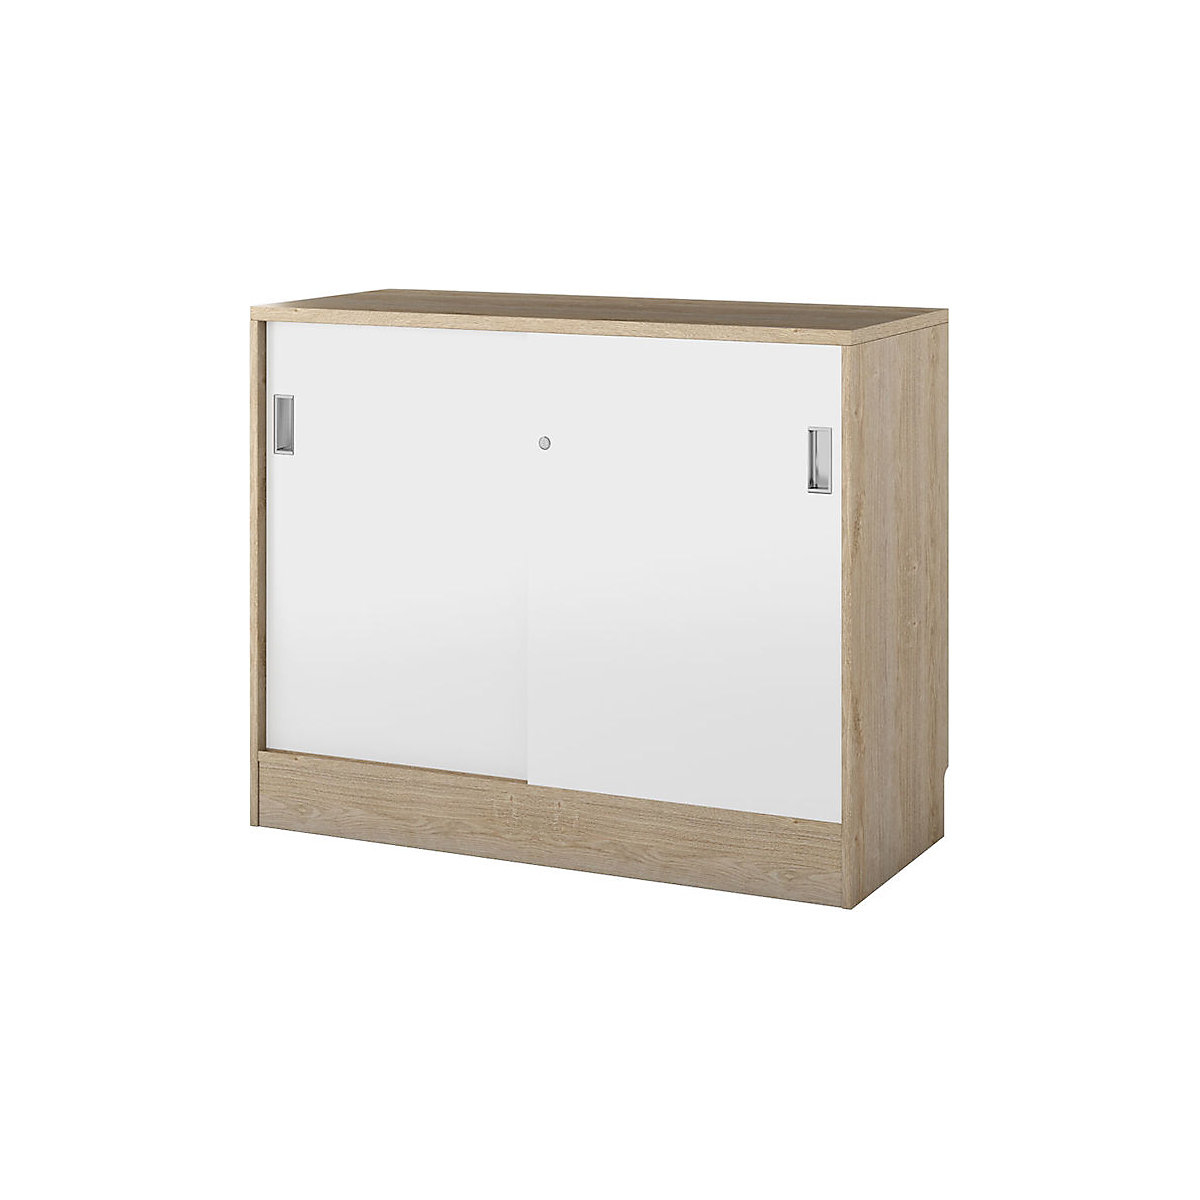 Chicago cupboard with sliding doors, HxWxD 948 x 1215 x 400 mm, oak / brushed white-12